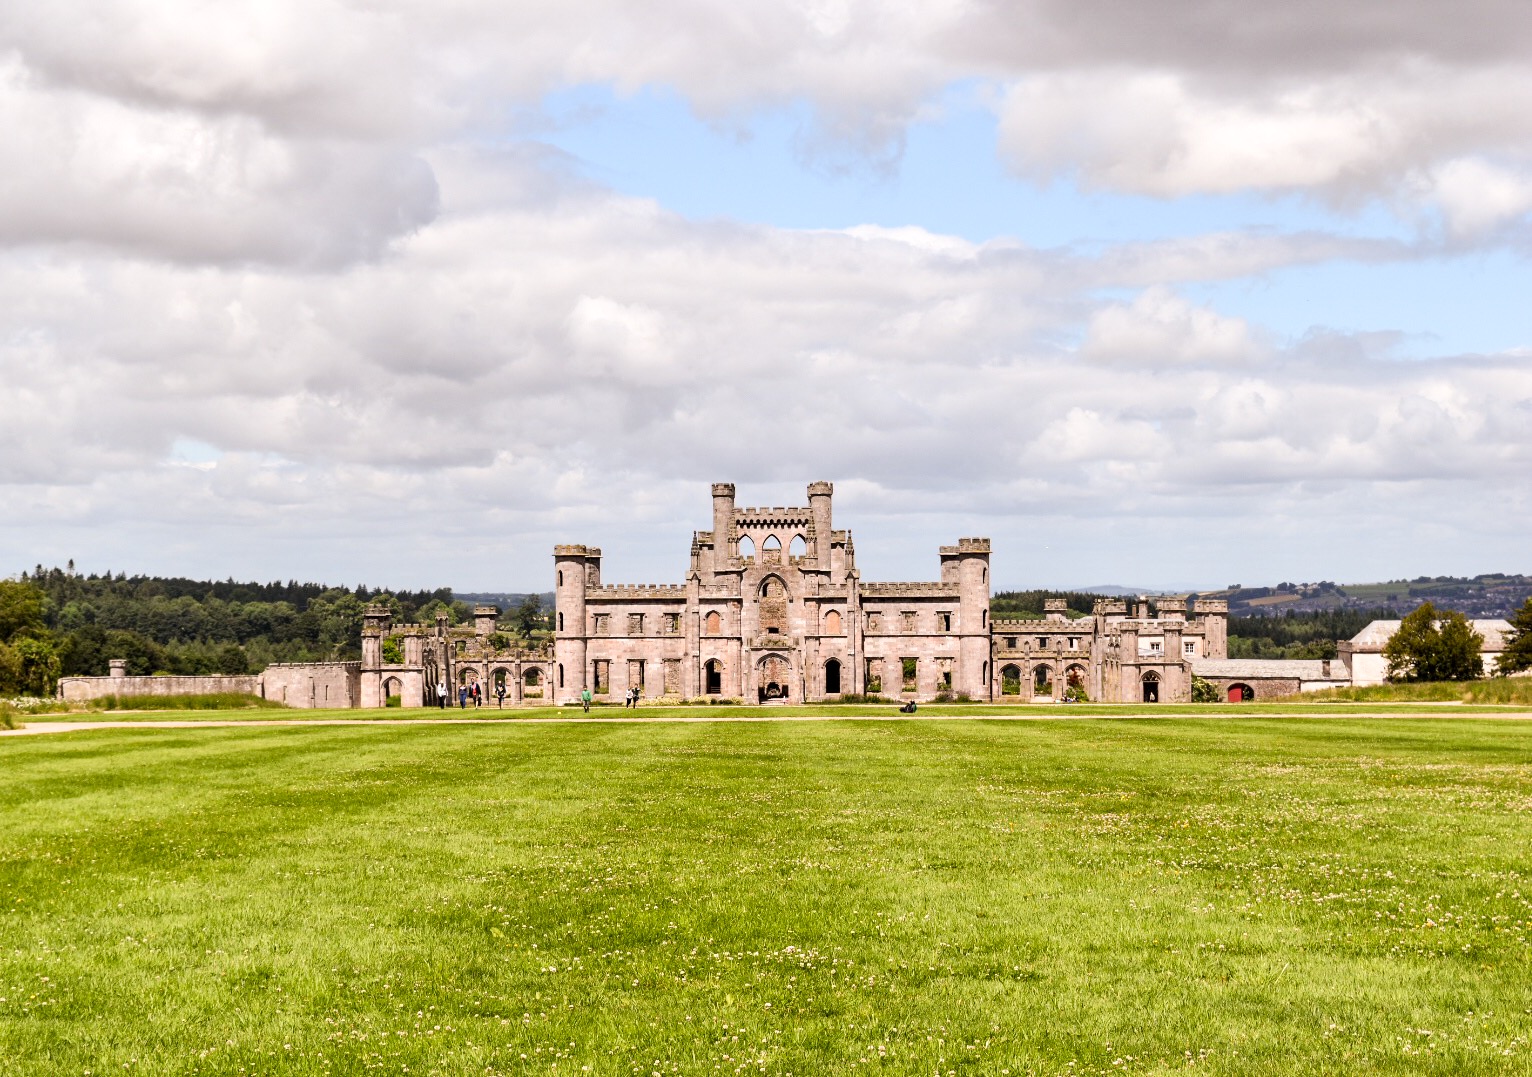 Lowther castle and Gardens